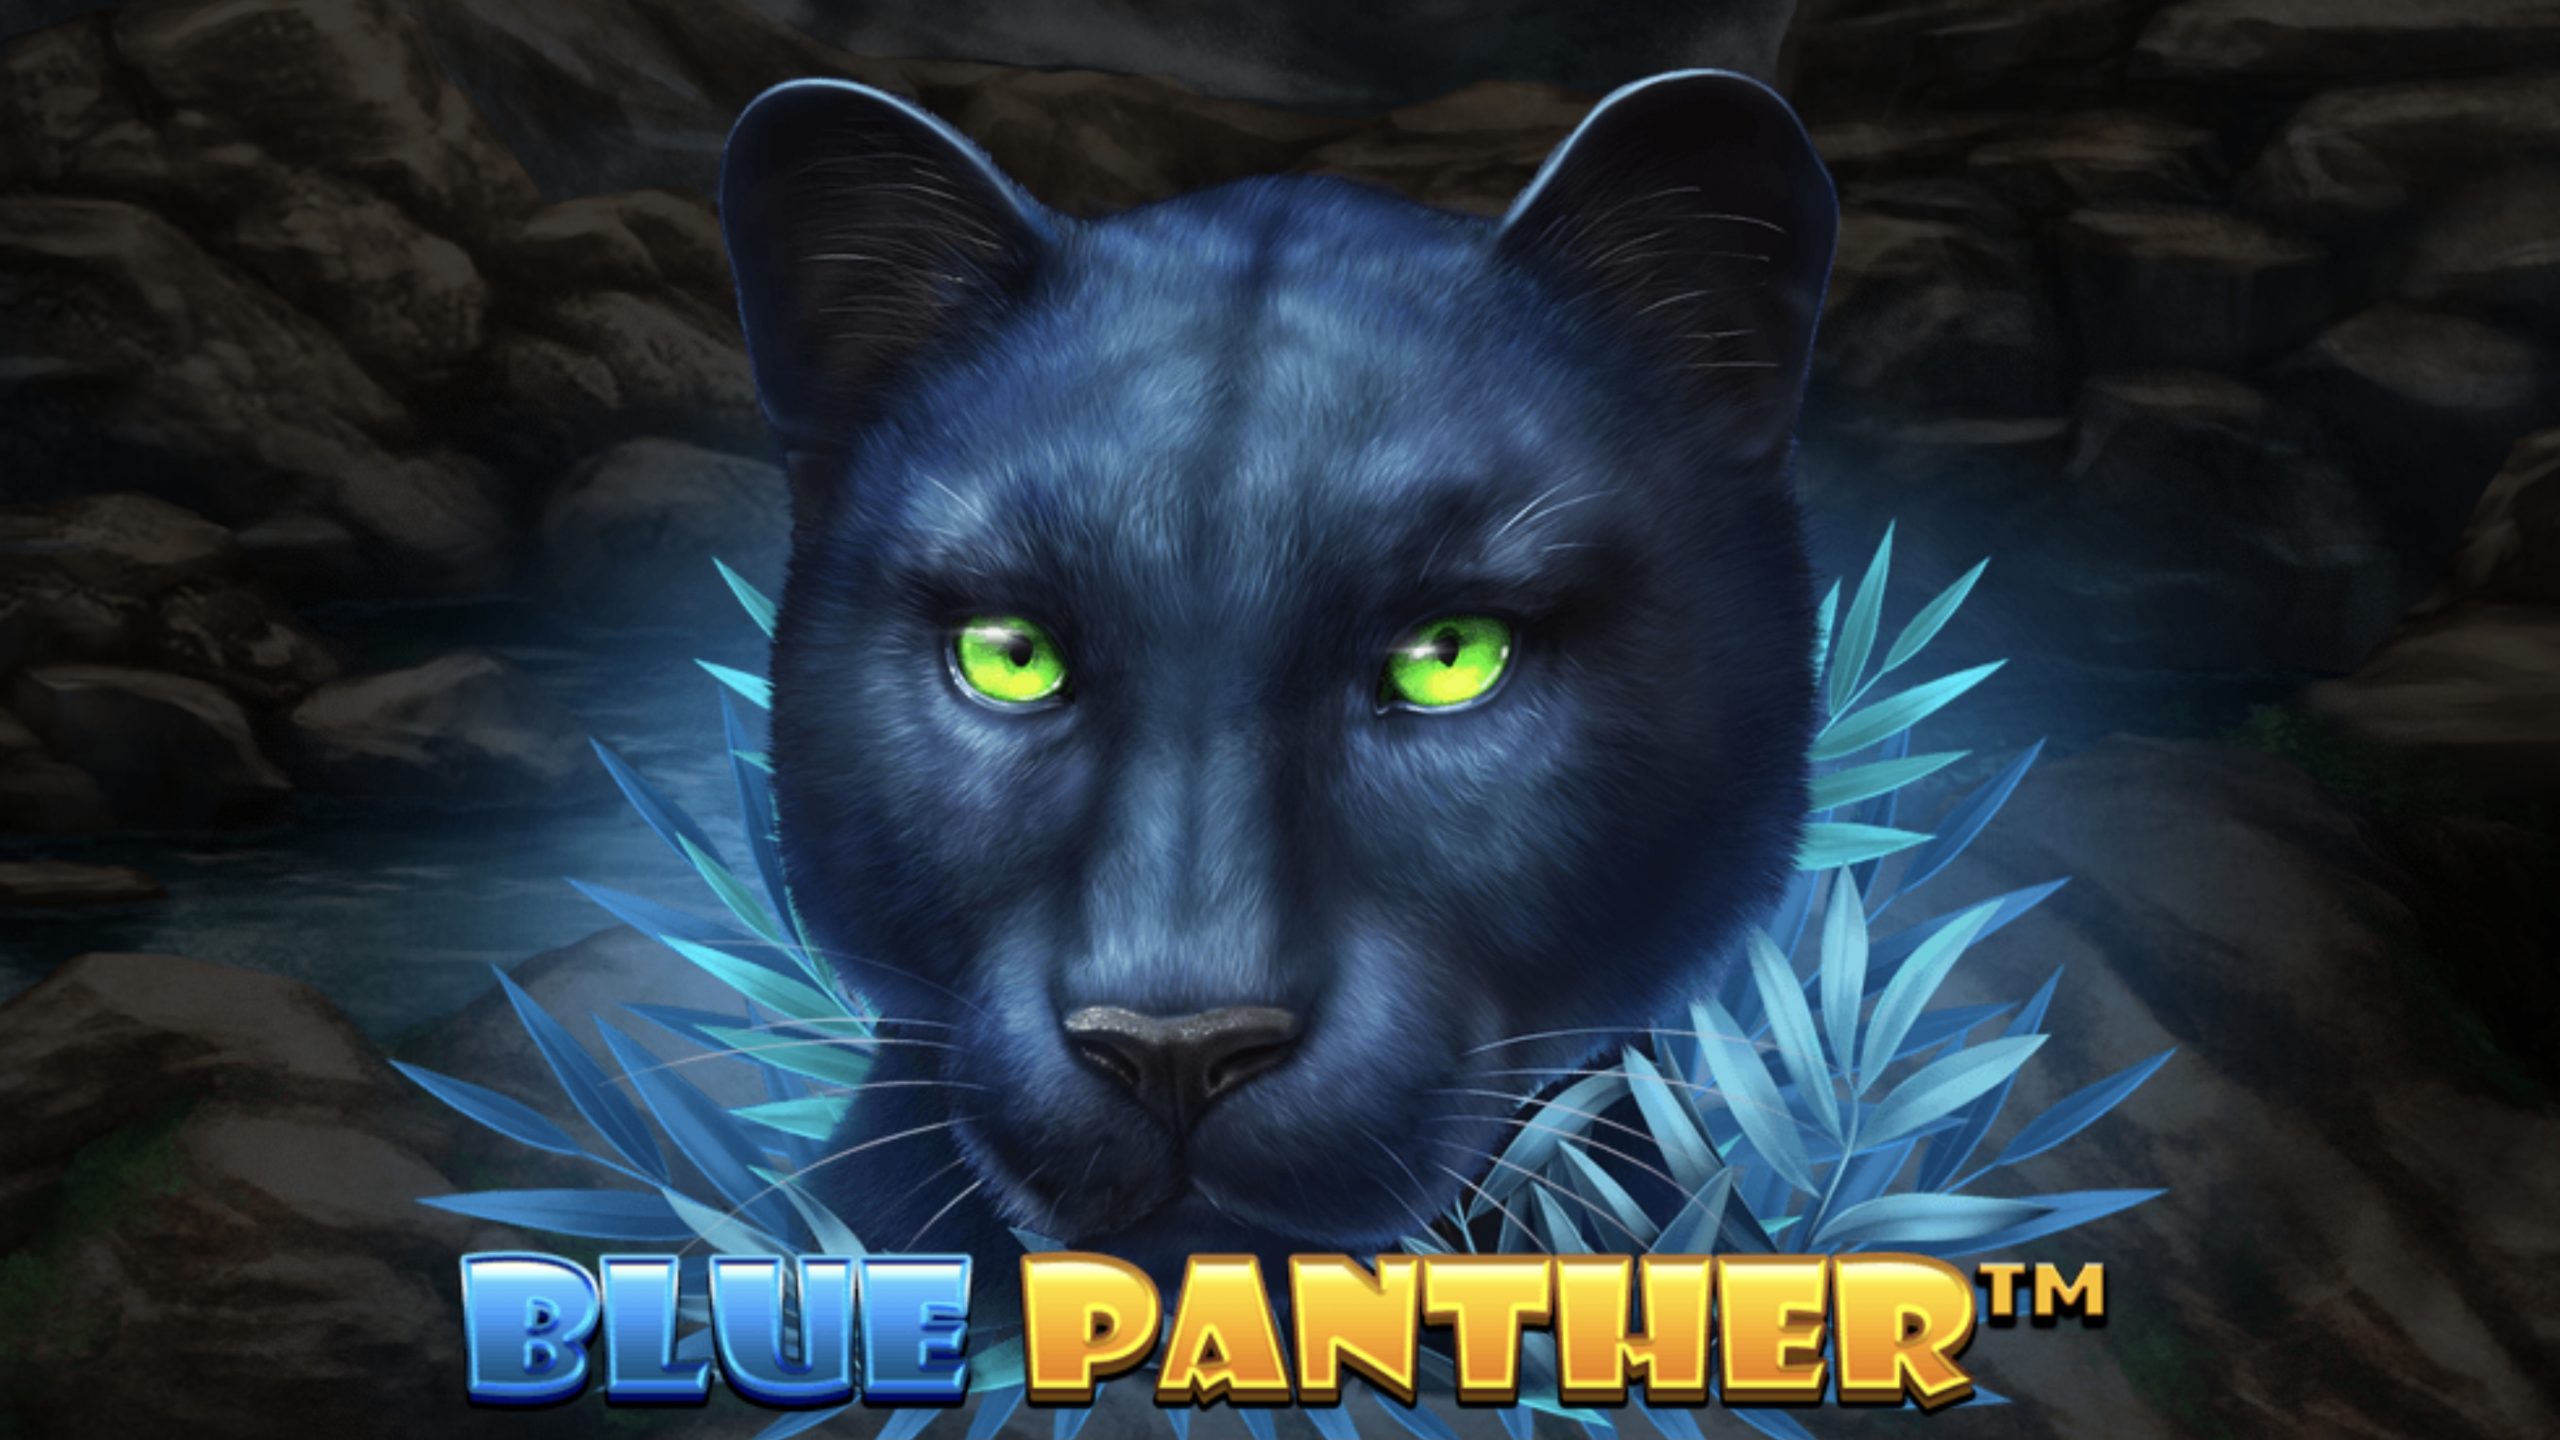 Blue Panther is a 5x3, 25-payline video slot which incorporates three jackpot prizes, a free games round and 3x3 symbols.